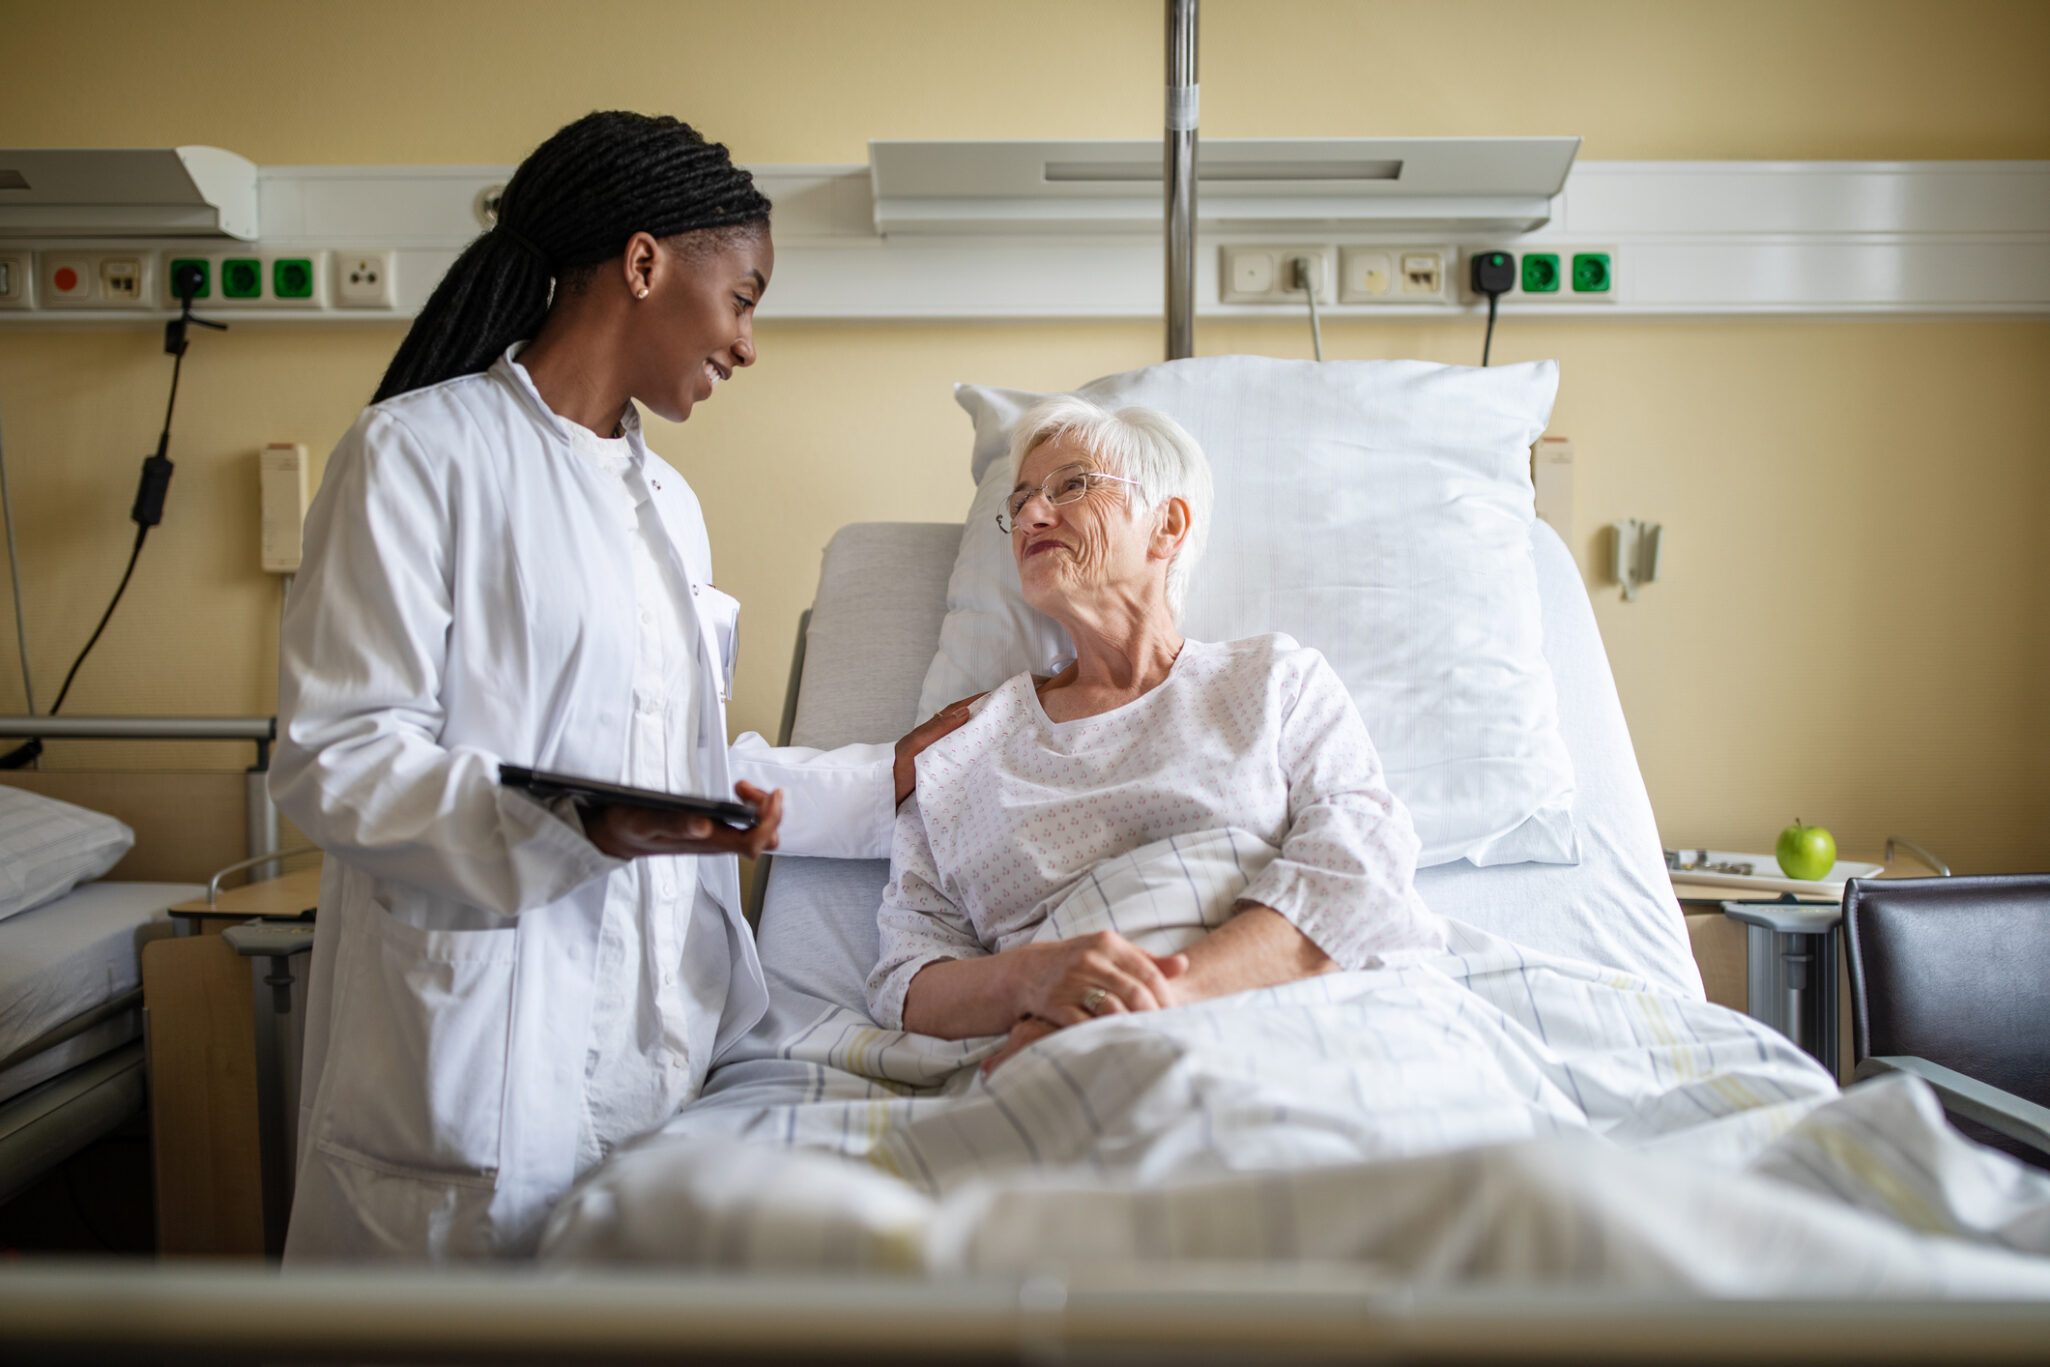 A doctor meets with an older adult who is receiving post hospital rehabilitation care